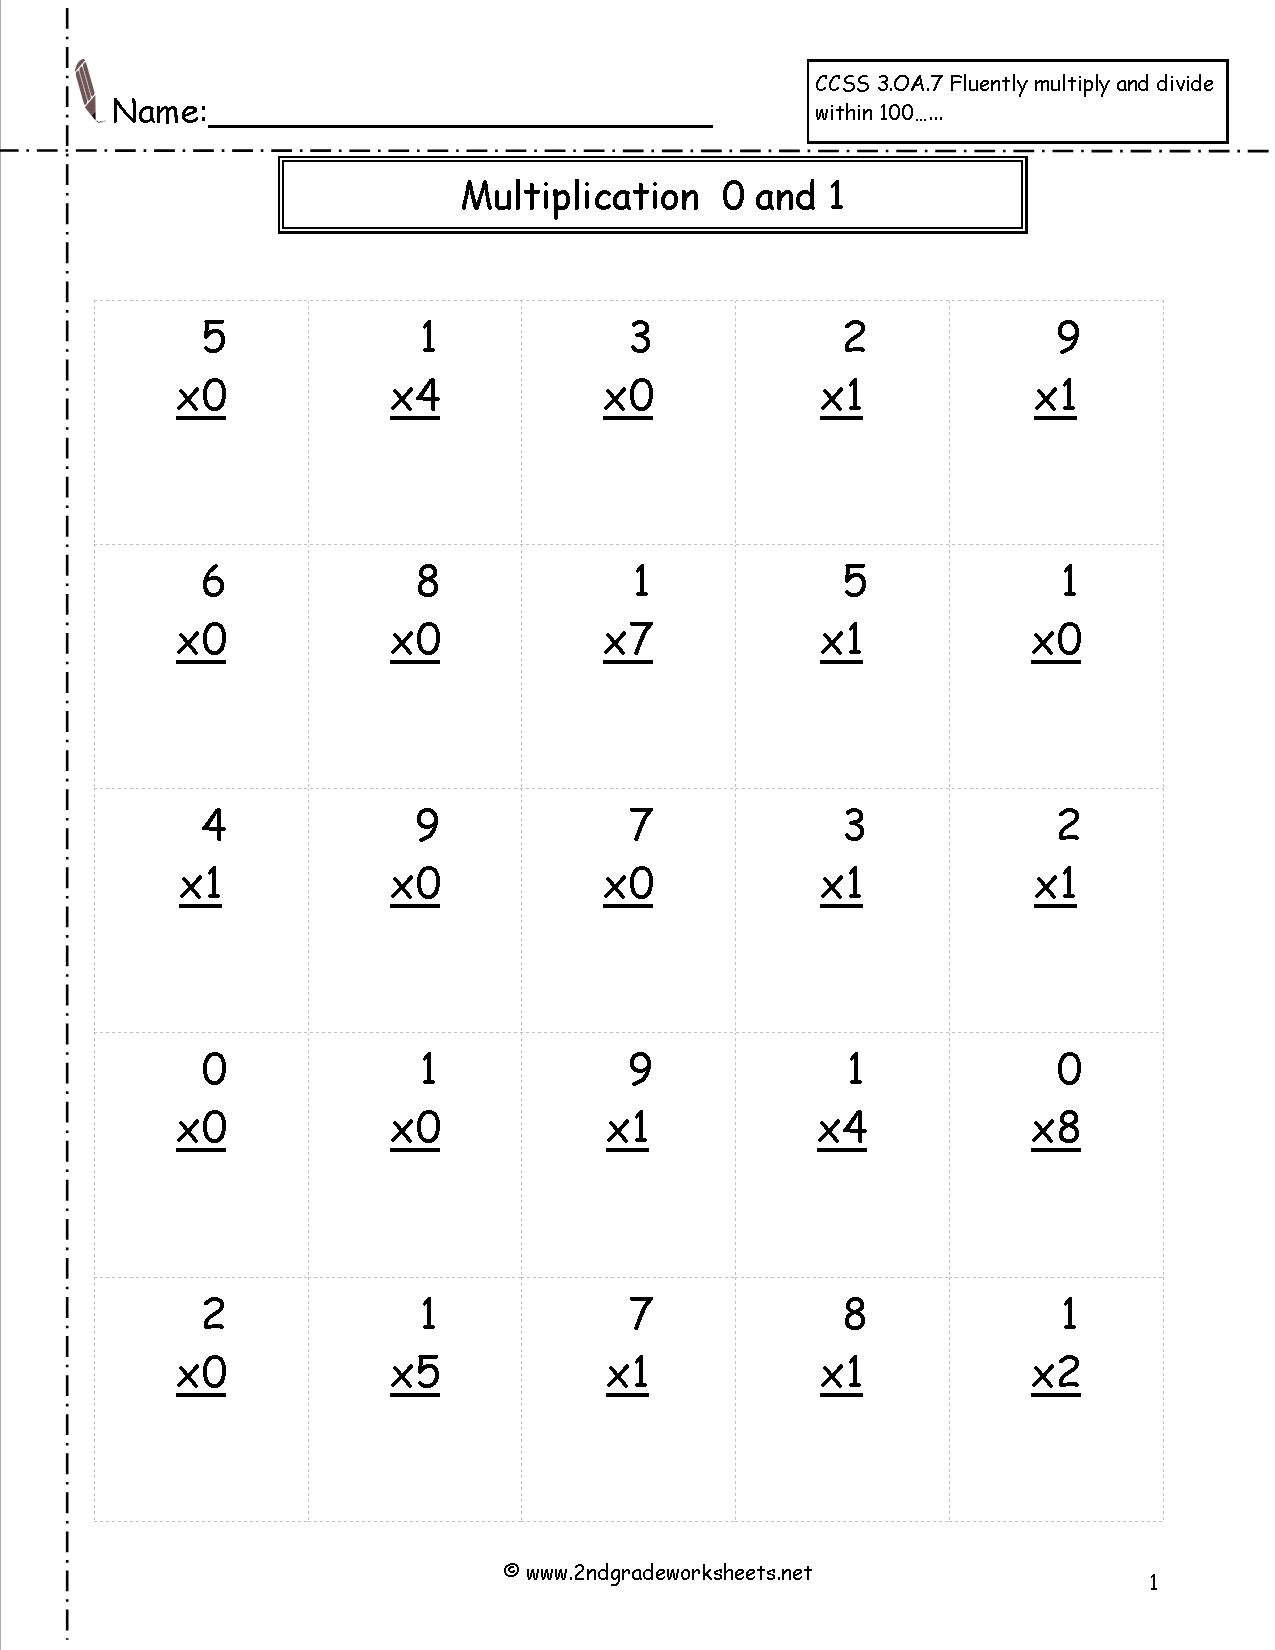 Worksheet Ideas ~ Sixth Grade Multiplying Doubles Math within Multiplication Worksheets K5